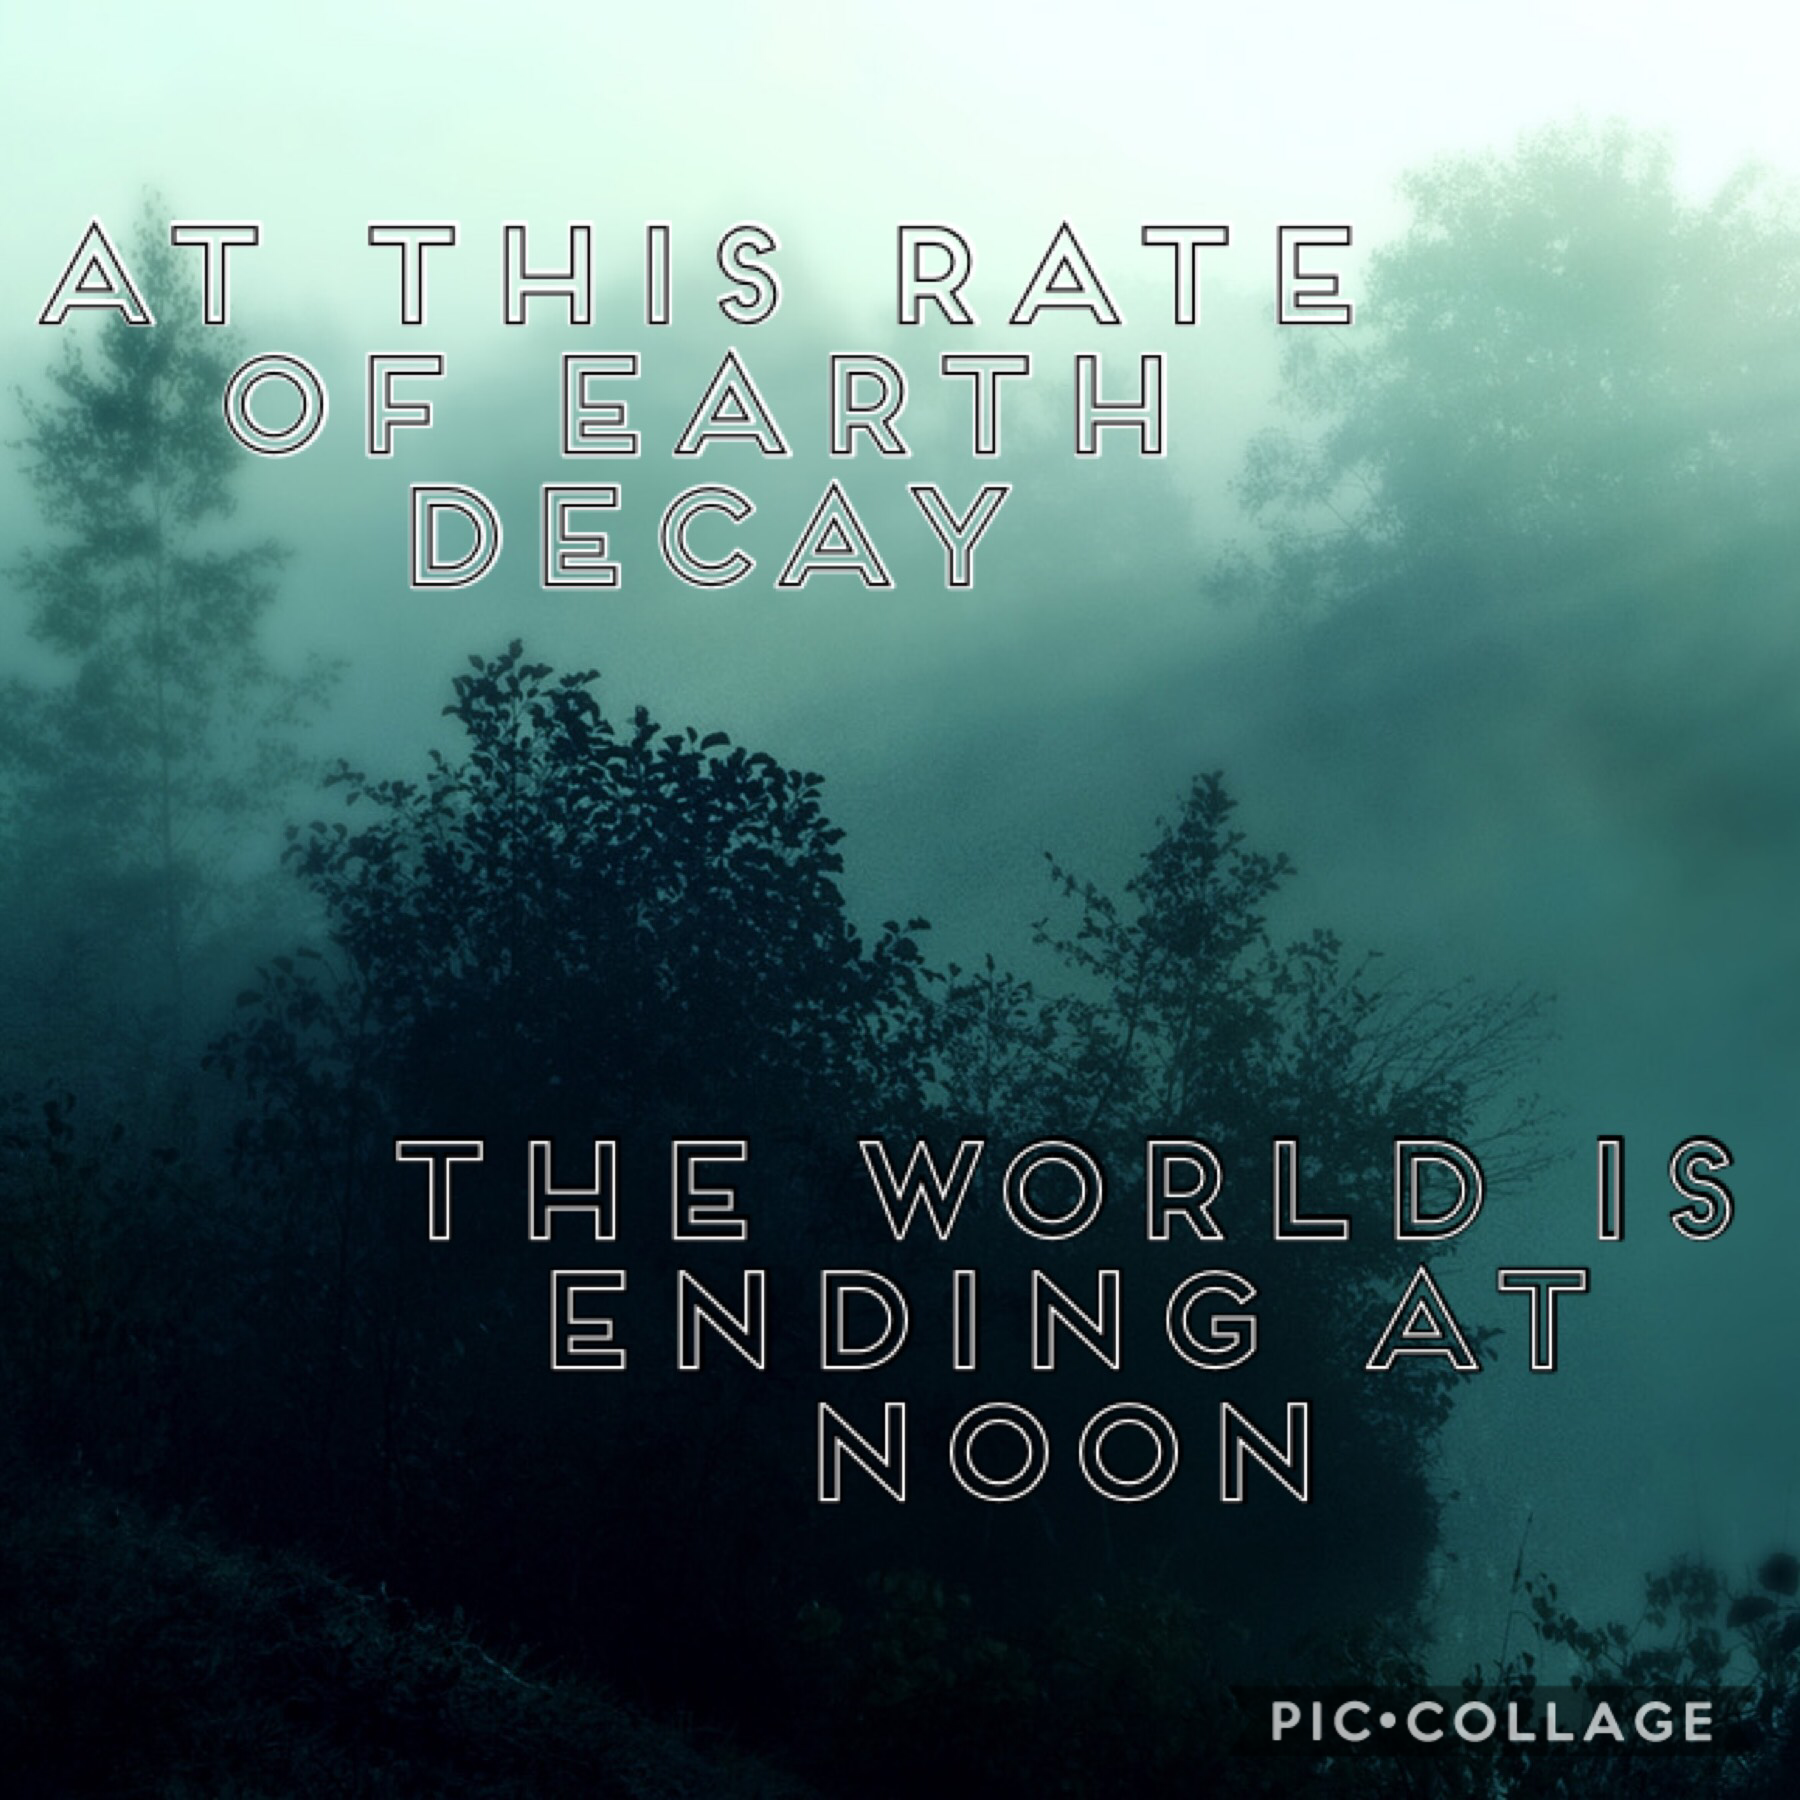 “At this rate of earth decay the world is ending at noon” -conan grey